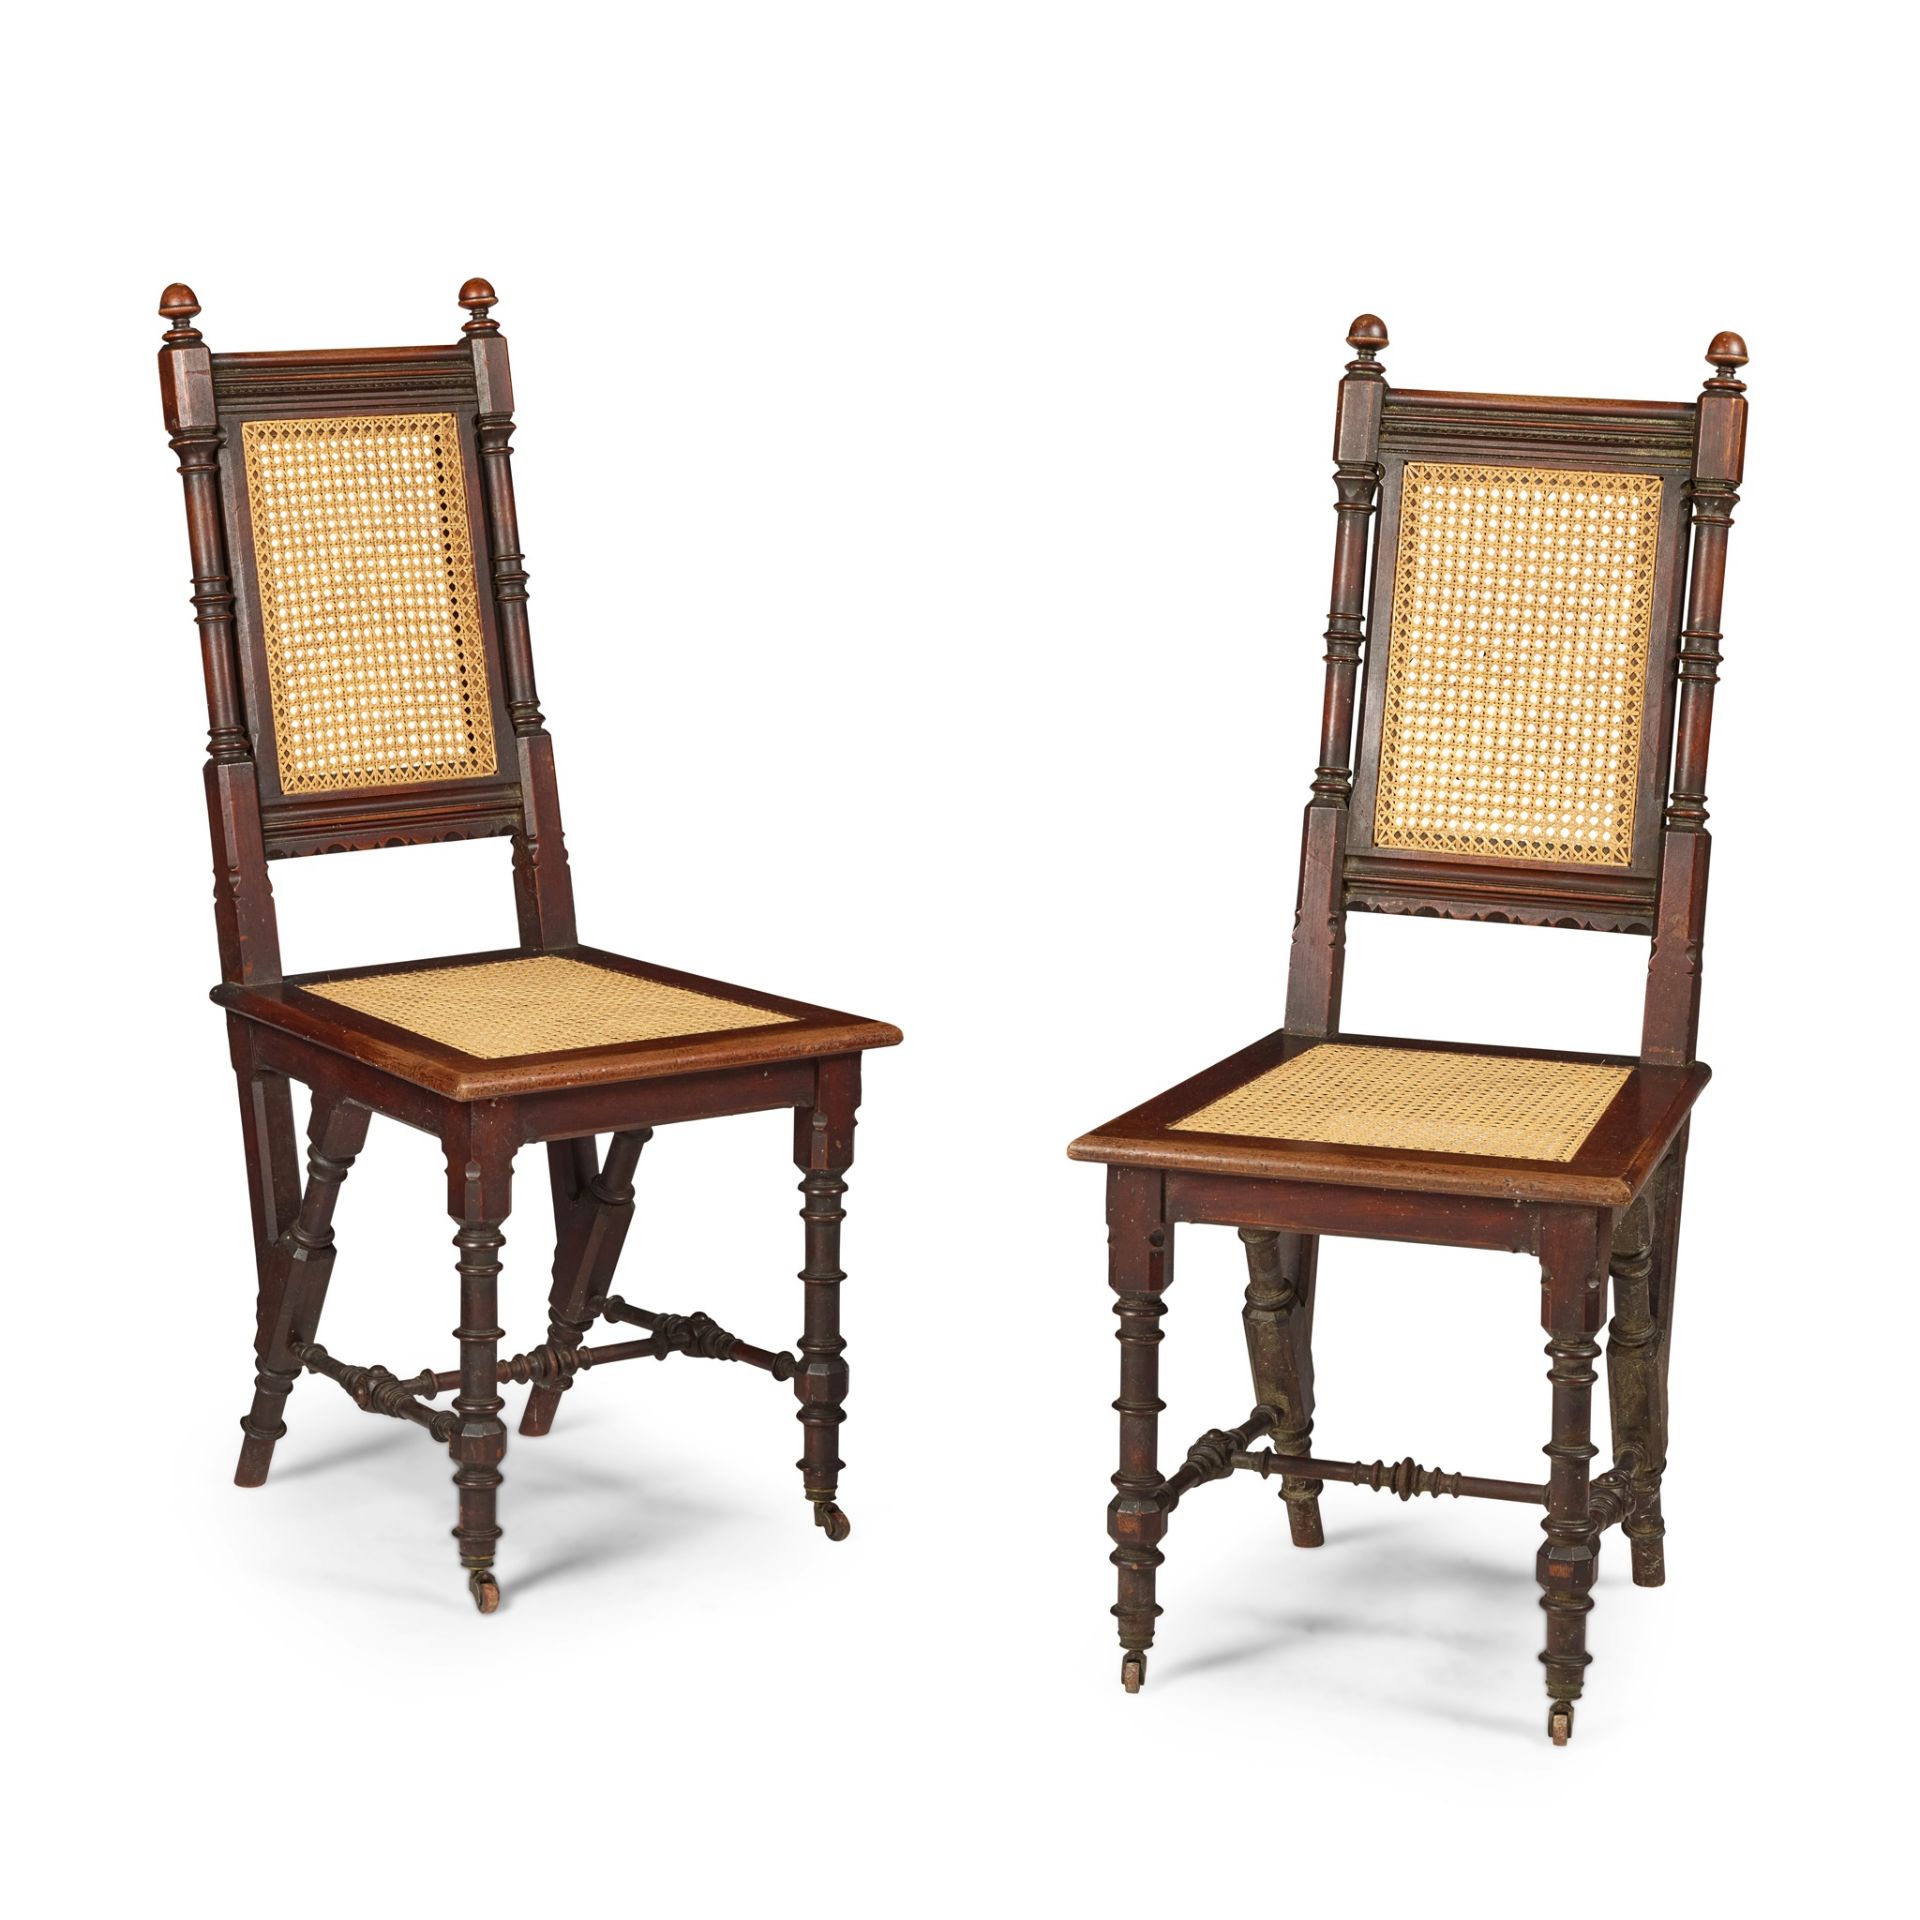 KIMBEL AND CABUS, NEW YORK (ATTRIBUTED MAKER) PAIR OF AESTHETIC MOVEMENT SIDE CHAIRS, CIRCA 1890